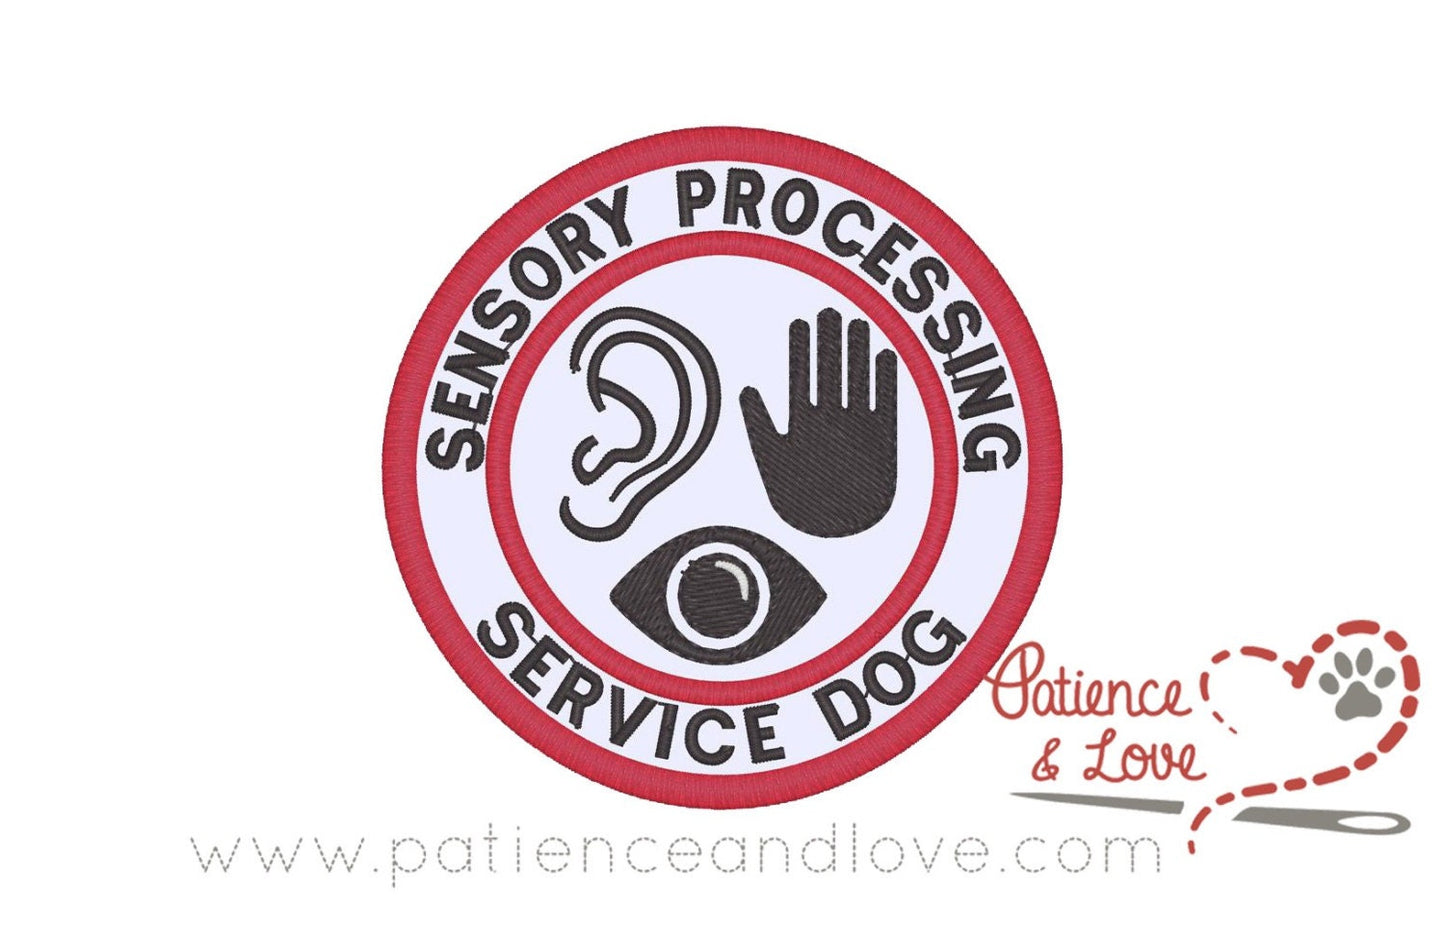 Sensory Processing Service Dog with ear, hand, and eye in center, 3 inch round patch